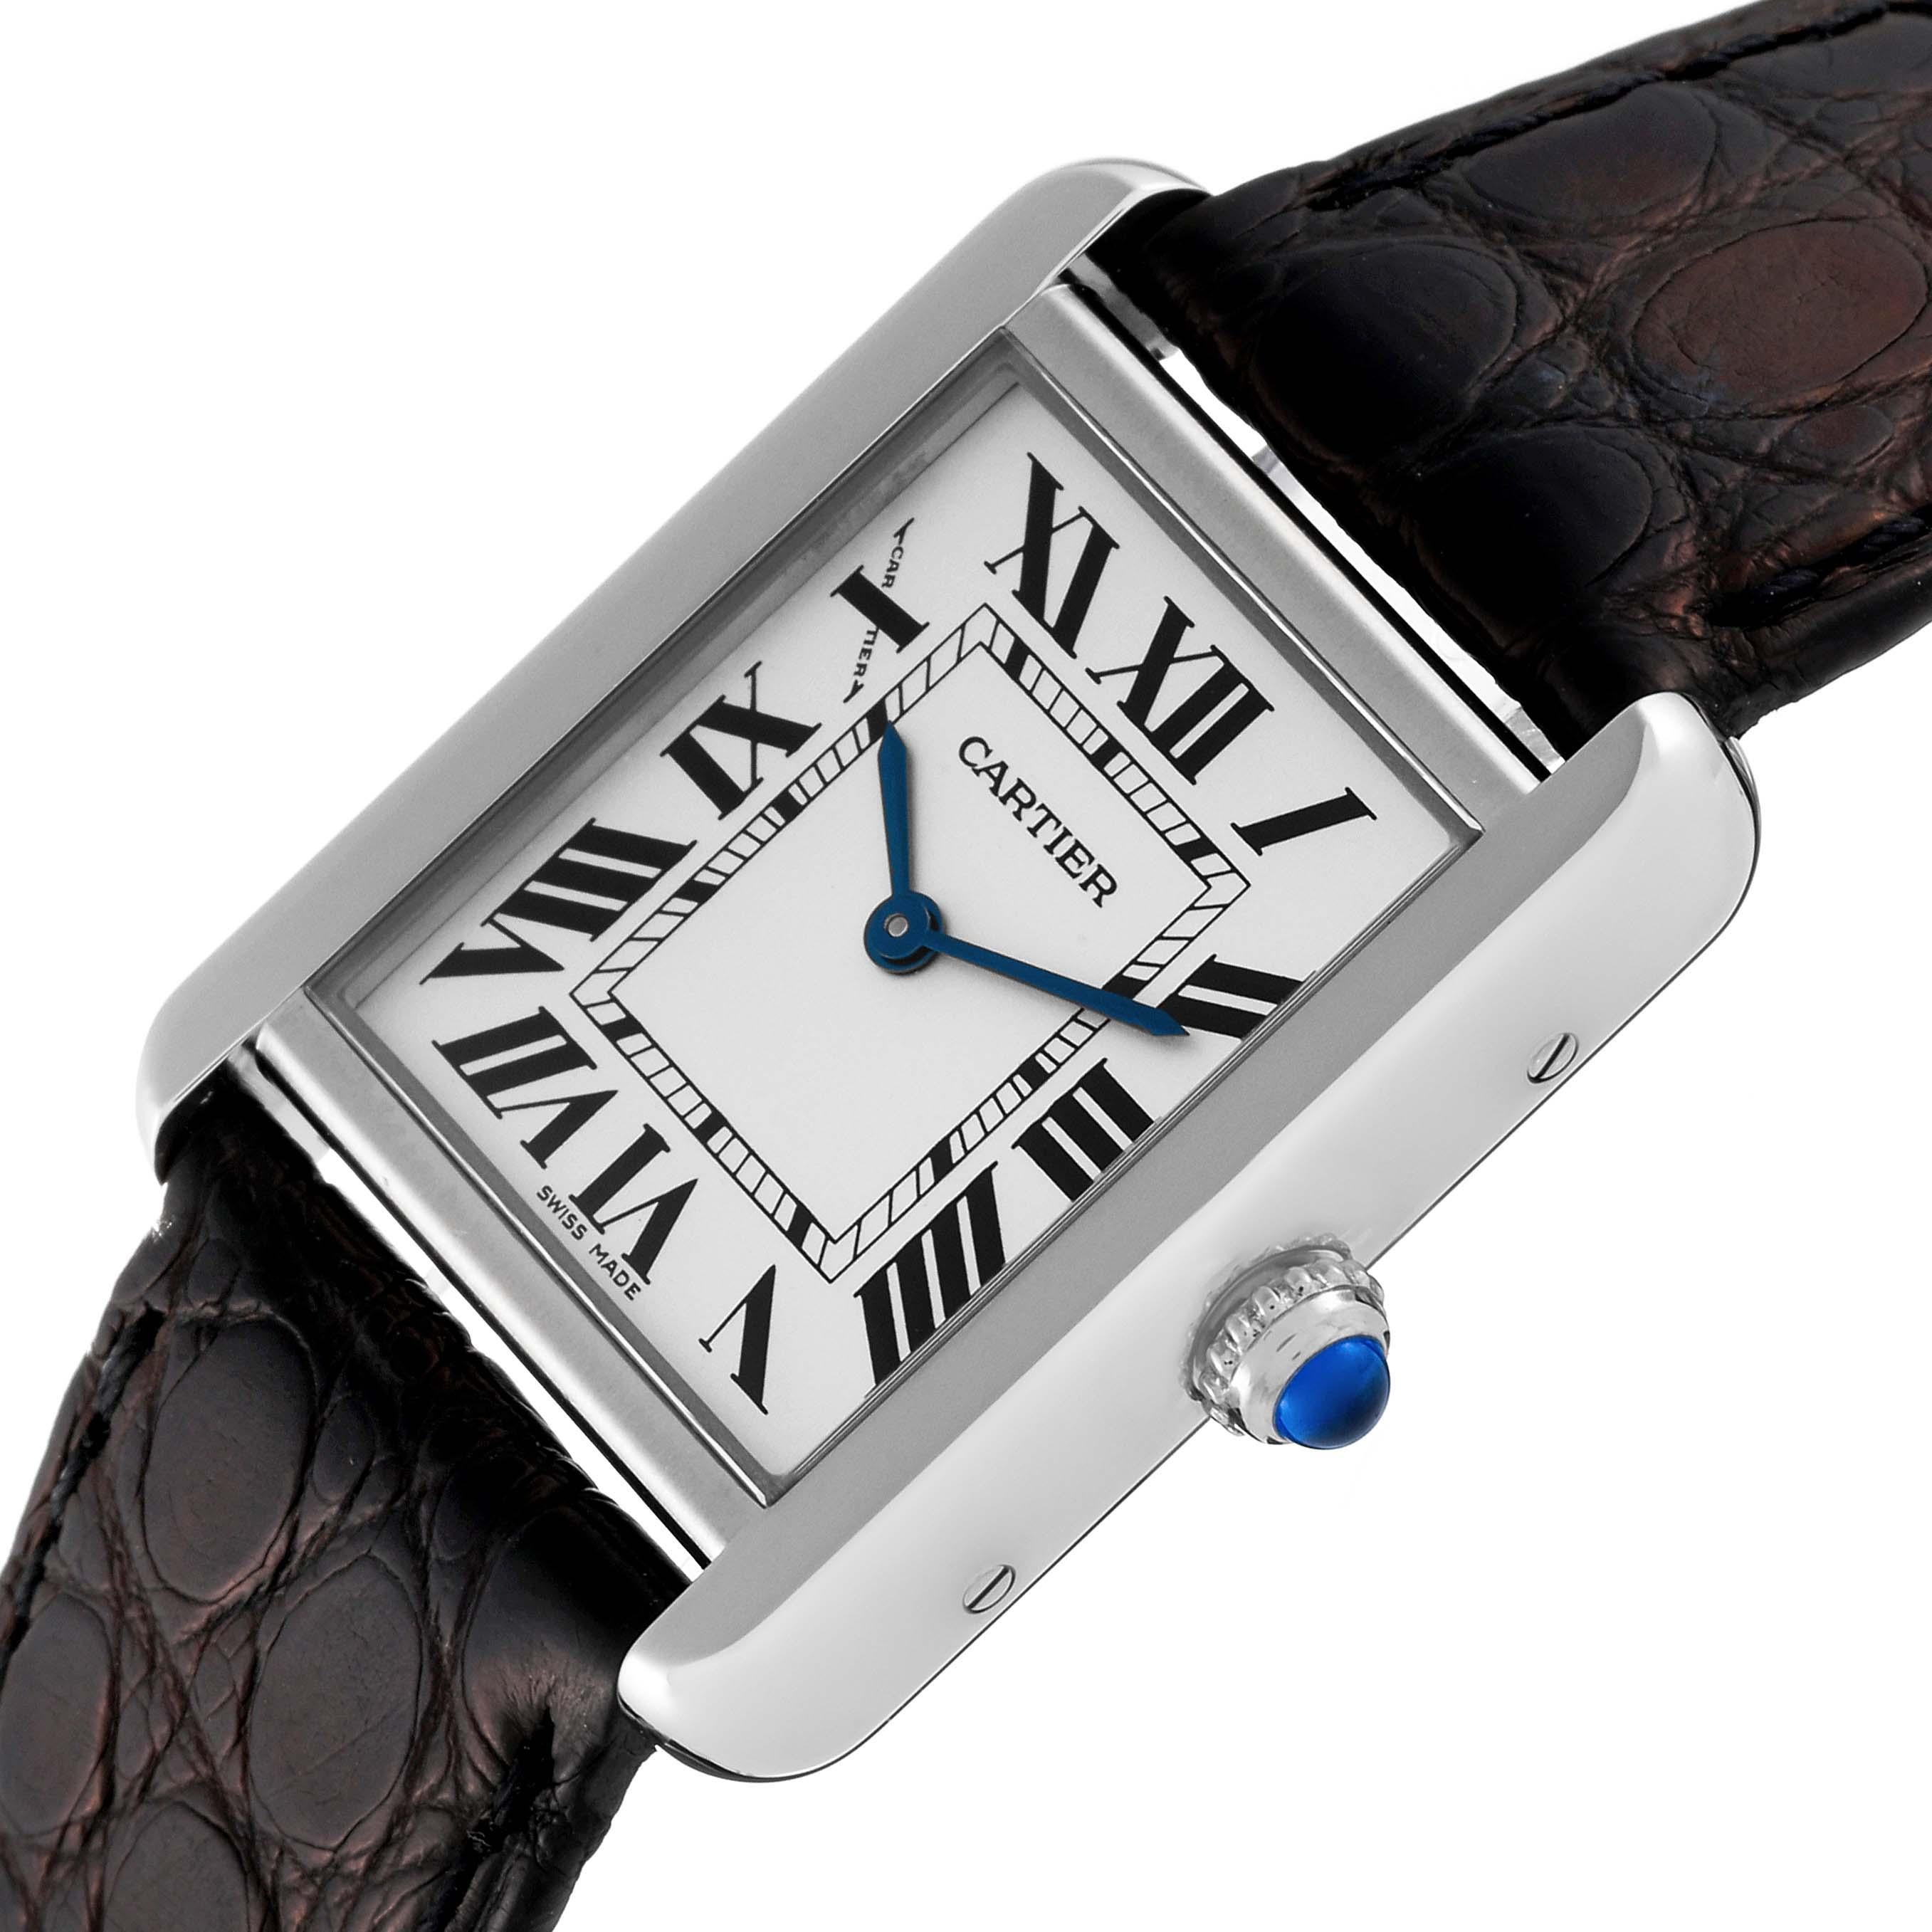 Cartier Tank Solo Steel Black Strap Quartz Ladies Watch W1018255 Box Papers. Quartz movement. Stainless steel case 30.0 x 23.0 mm. Circular grained crown set with a blue spinel cabochon. . Scratch resistant sapphire crystal. Silver opaline dial with